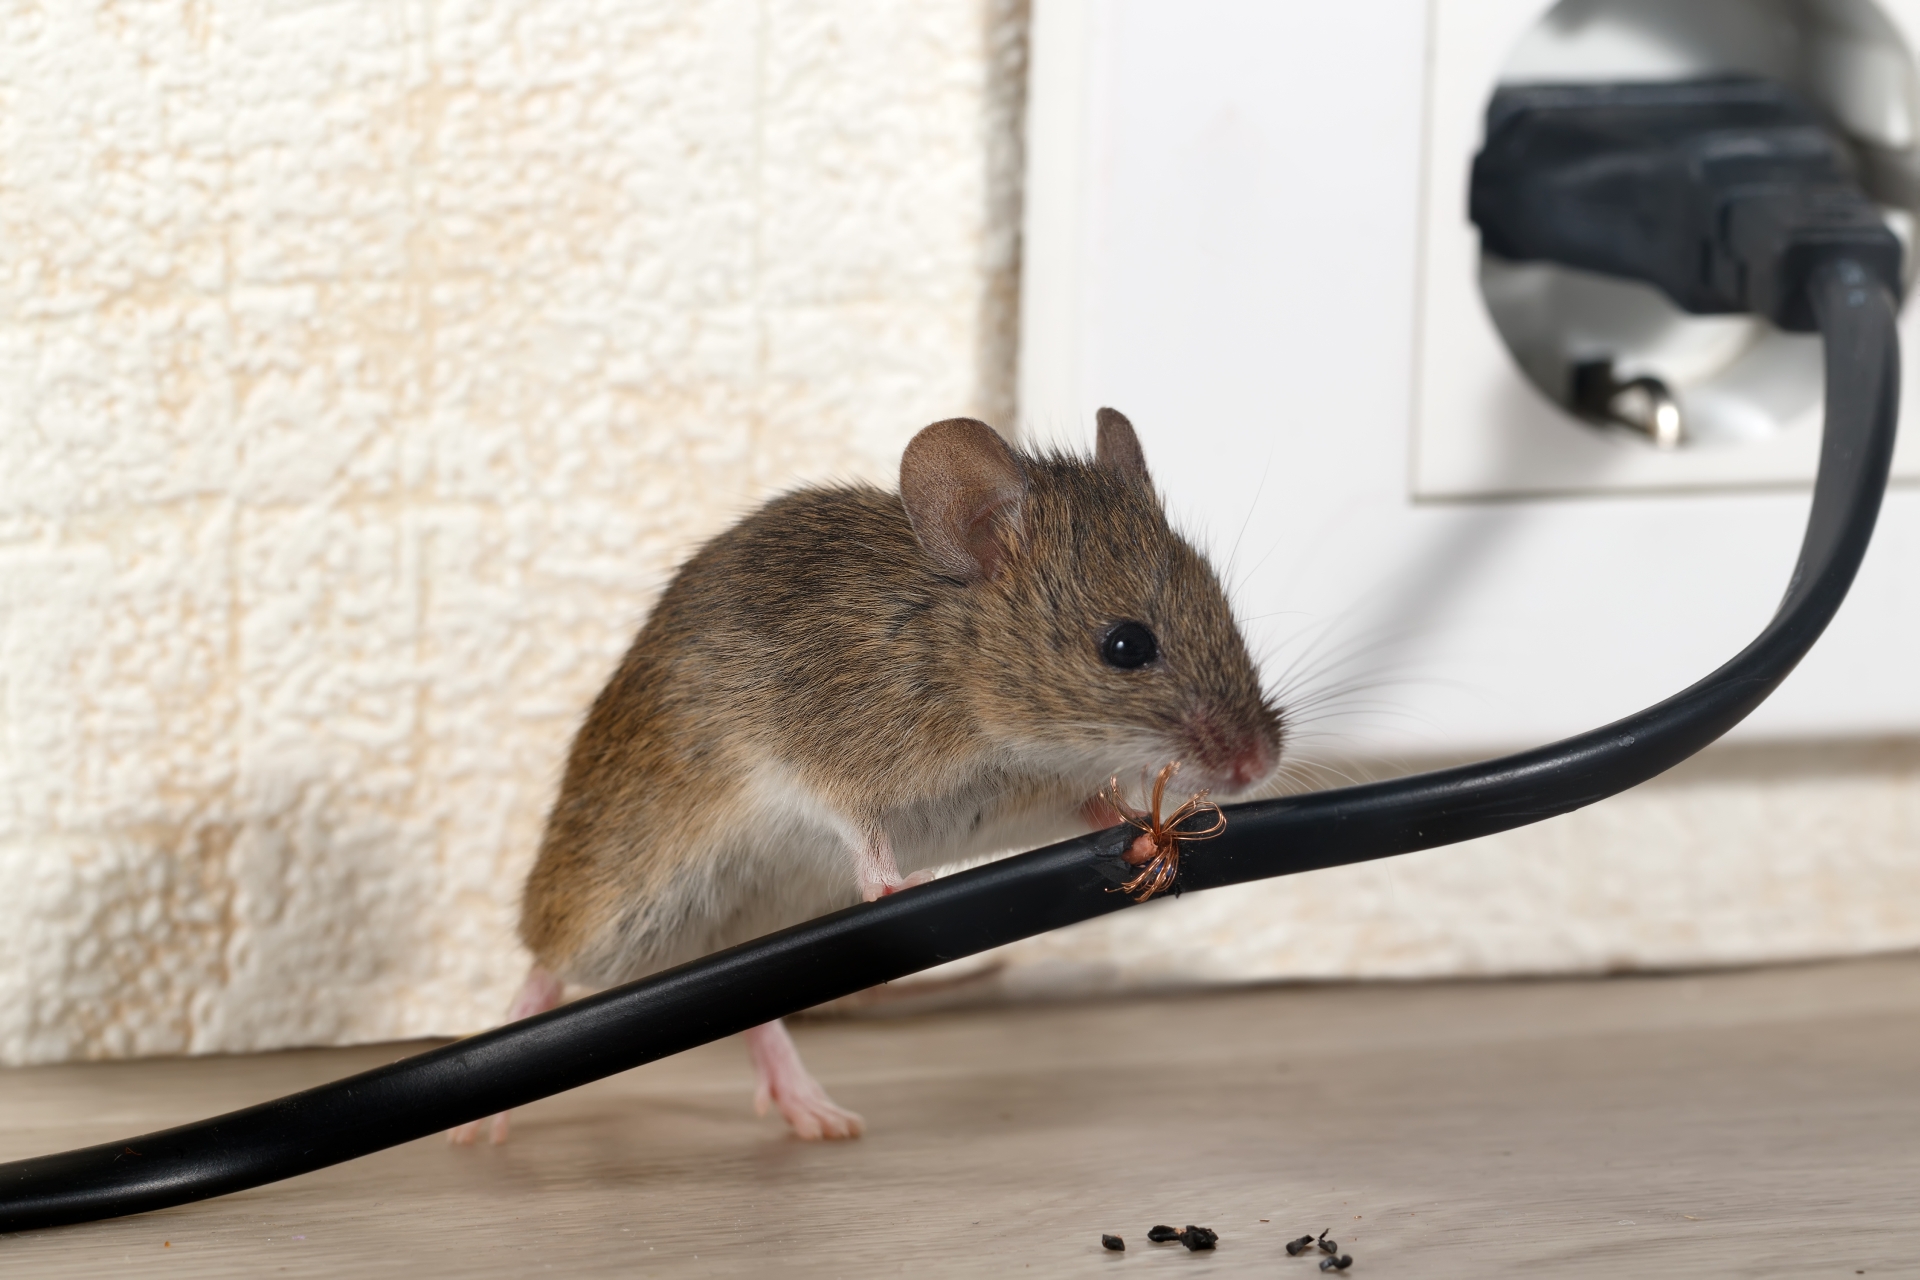 Mice Infestation, Pest Control in Mitcham, Mitcham Common, Pollards Hill, CR4. Call Now 020 8166 9746